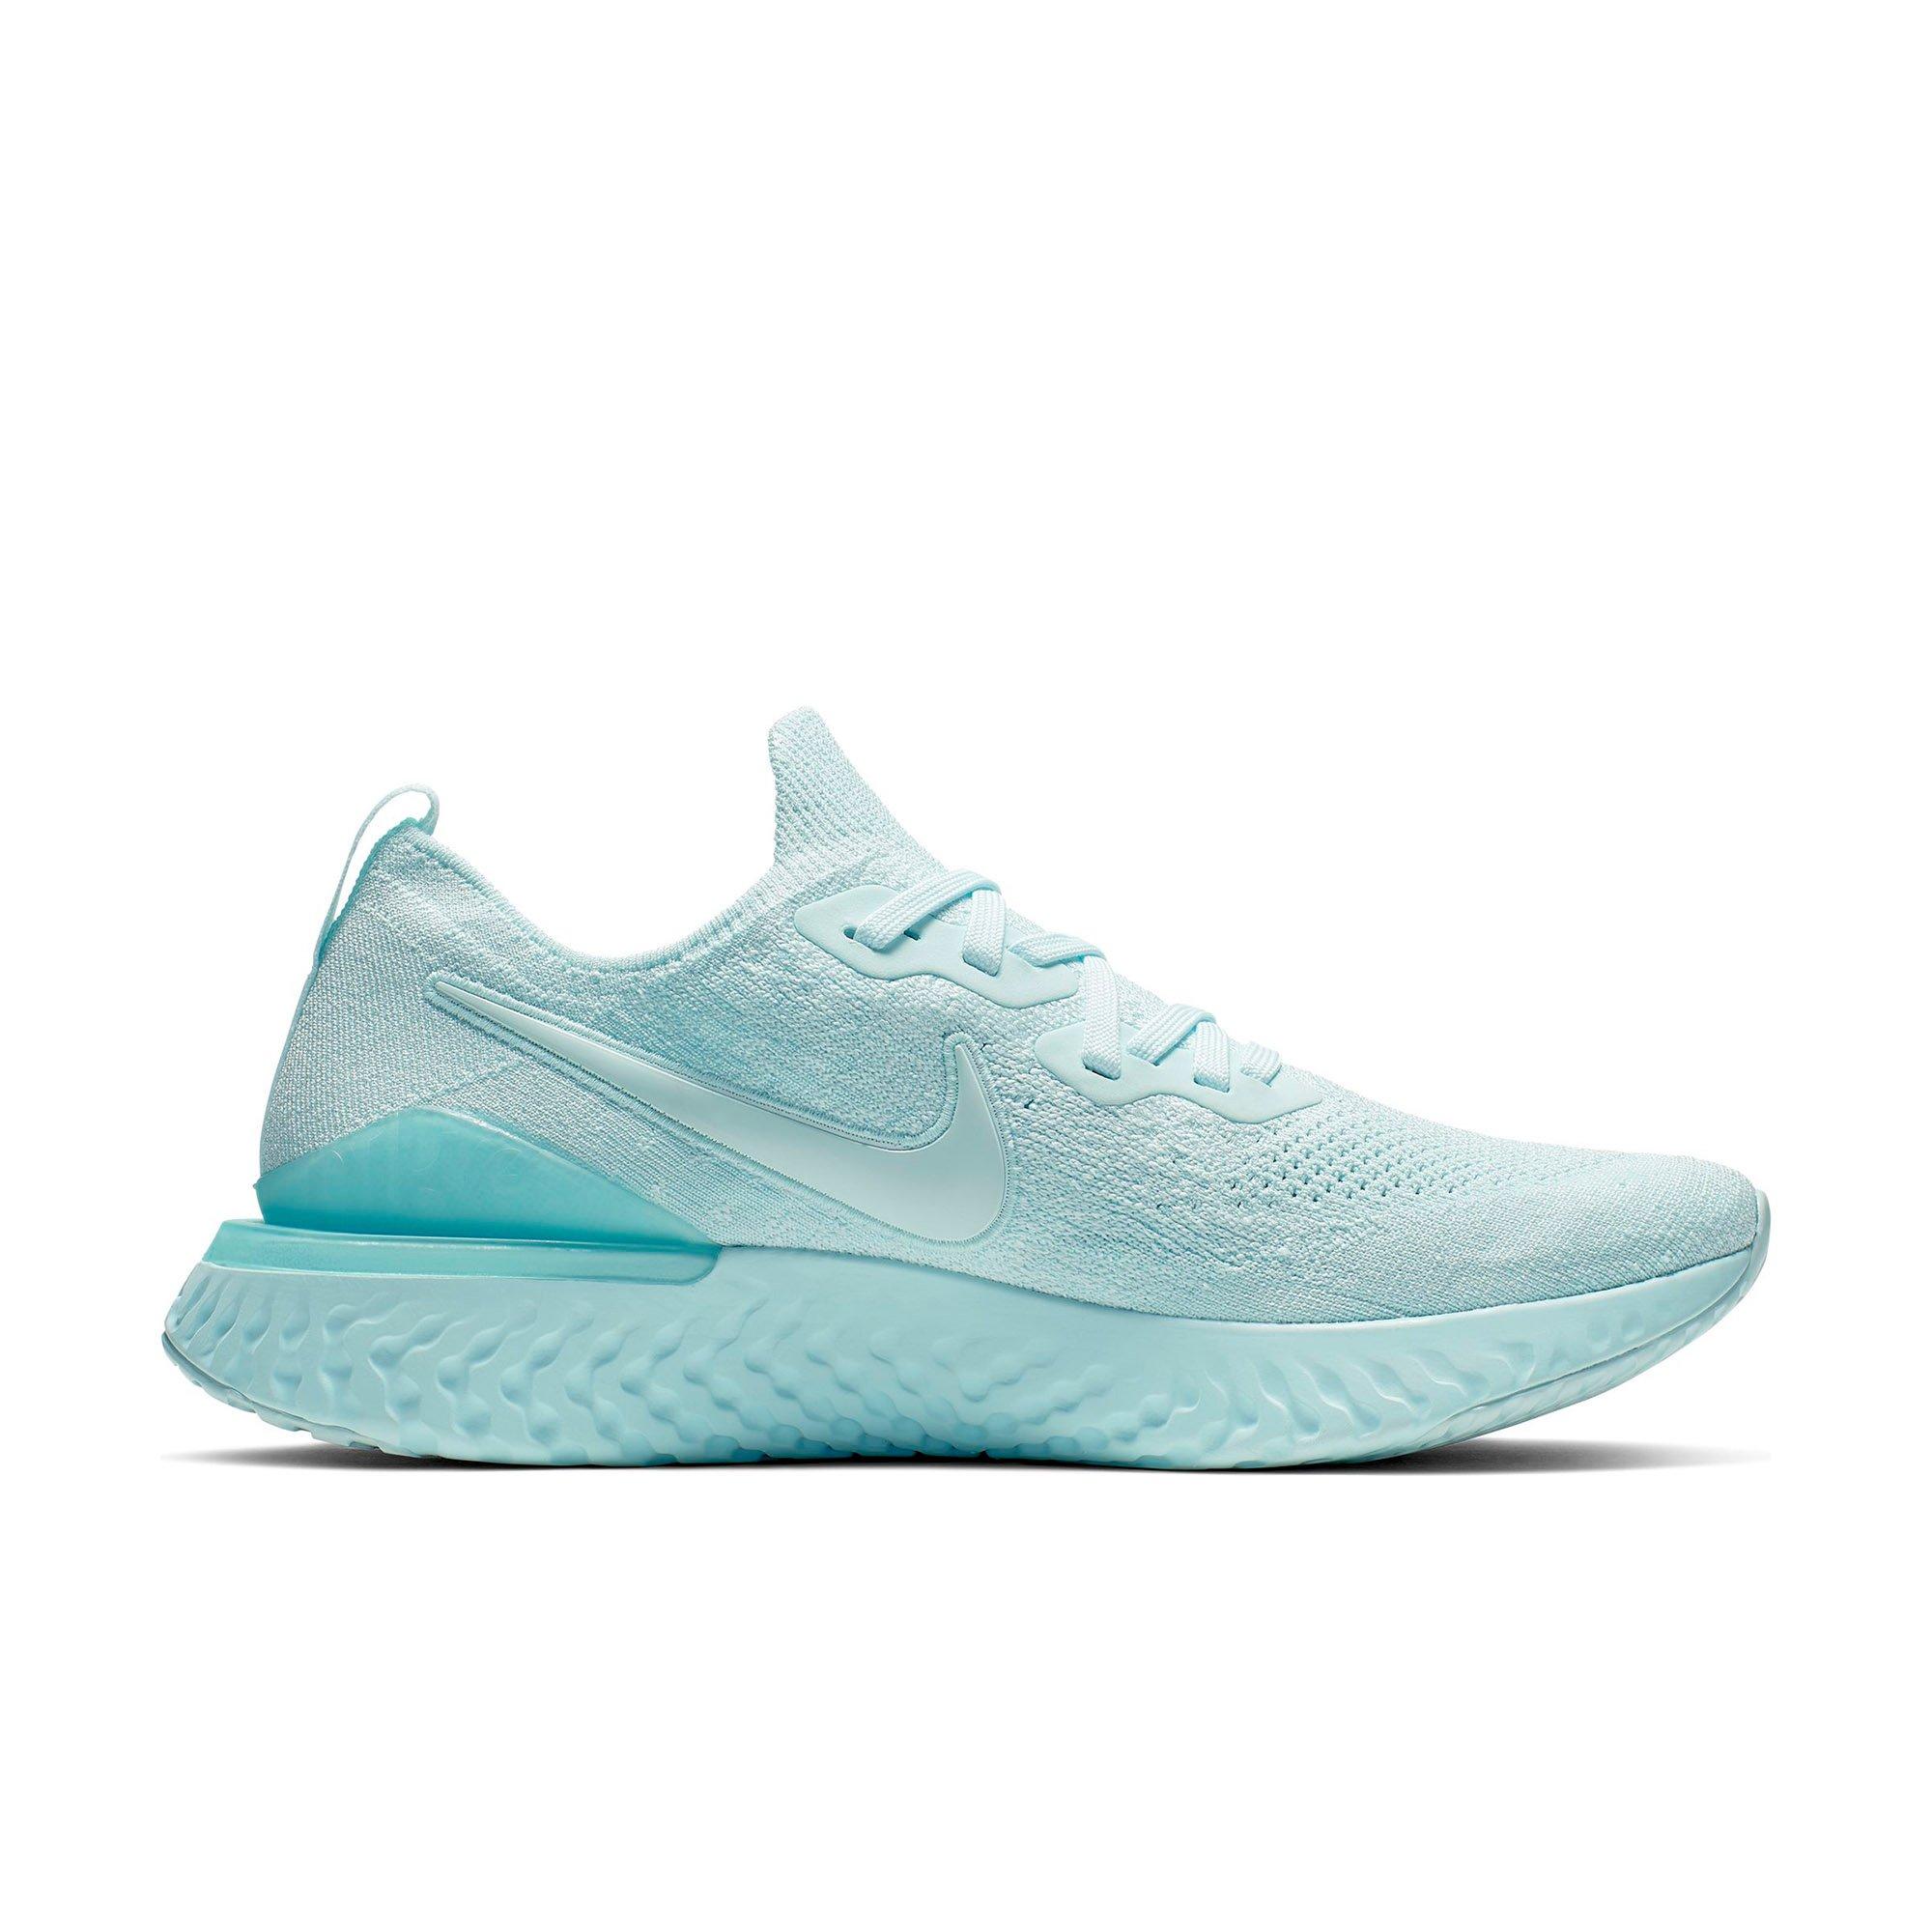 Nike Womens Epic React Flyknit 2 Running Shoes 9, Teal